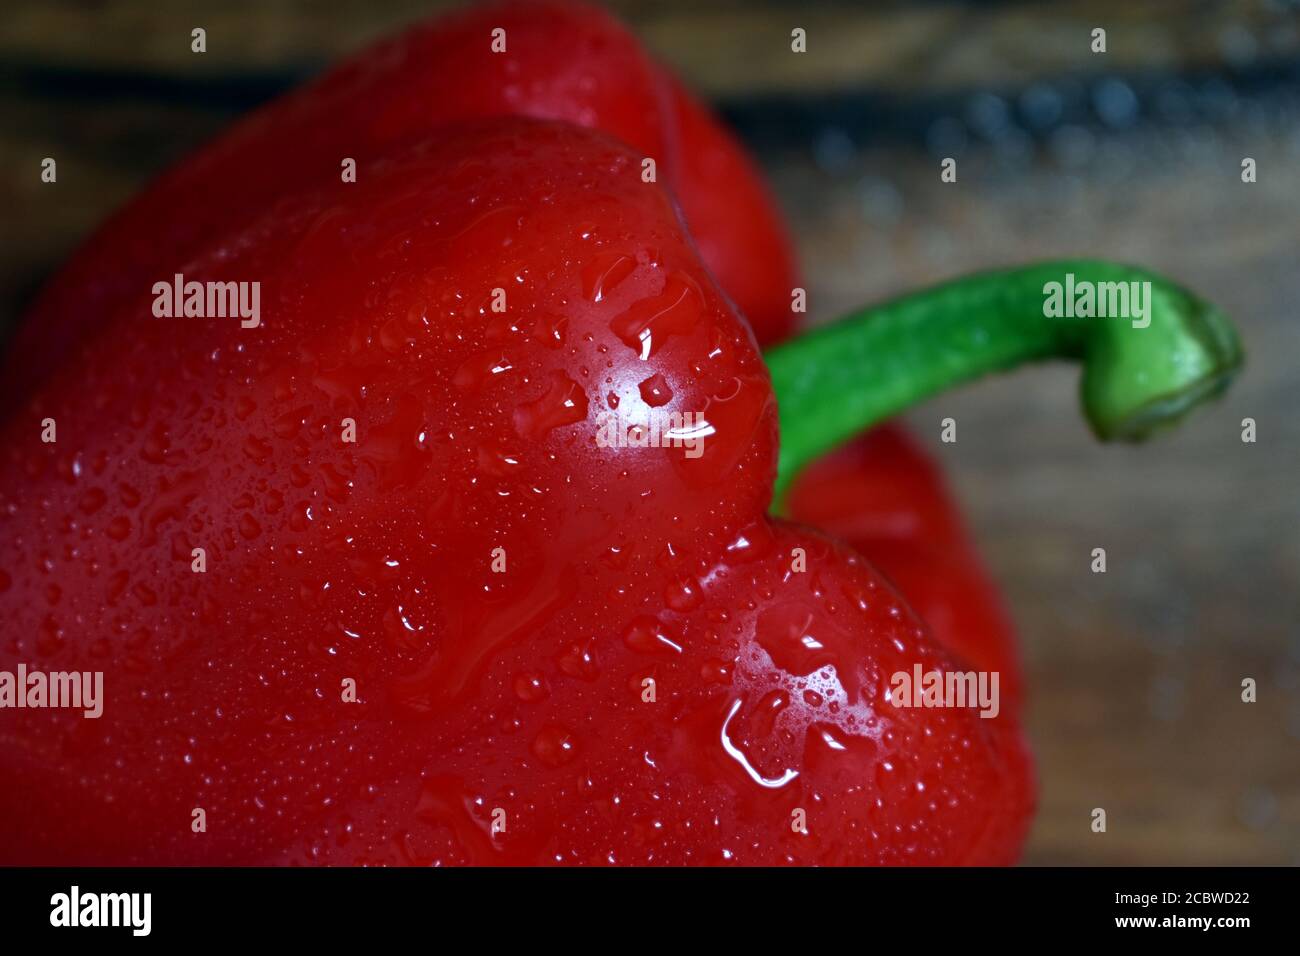 Red pepper wet with water droplets close up photo. Stock Photo